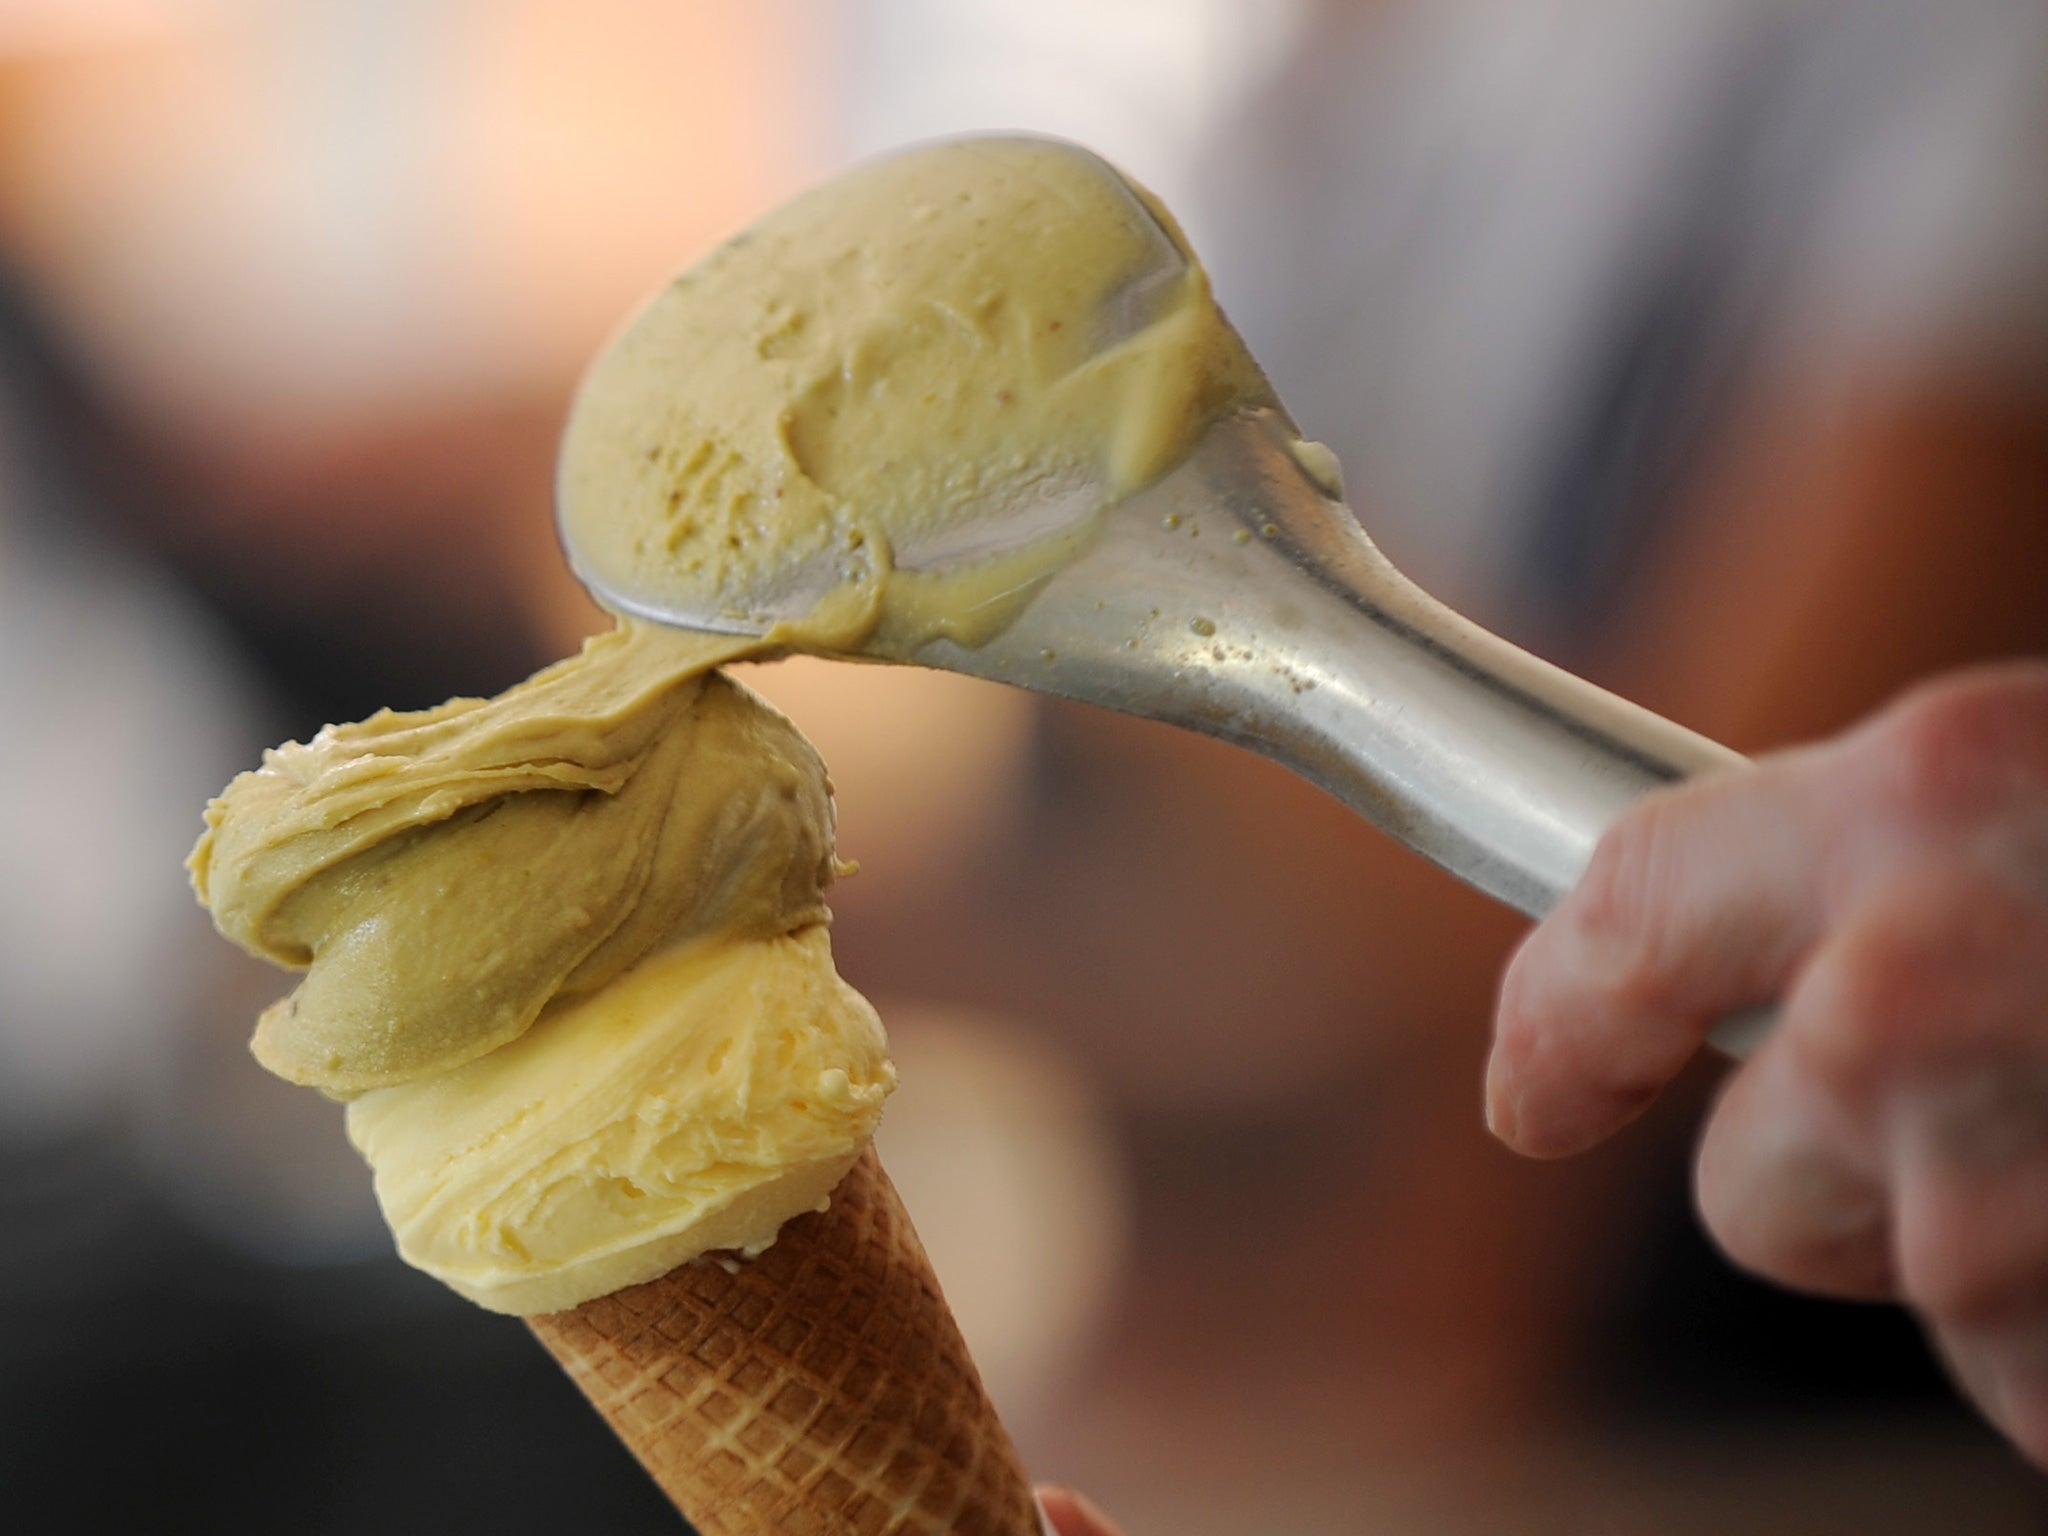 Nestlé and R&R agree to merge ice cream and frozen food businesses